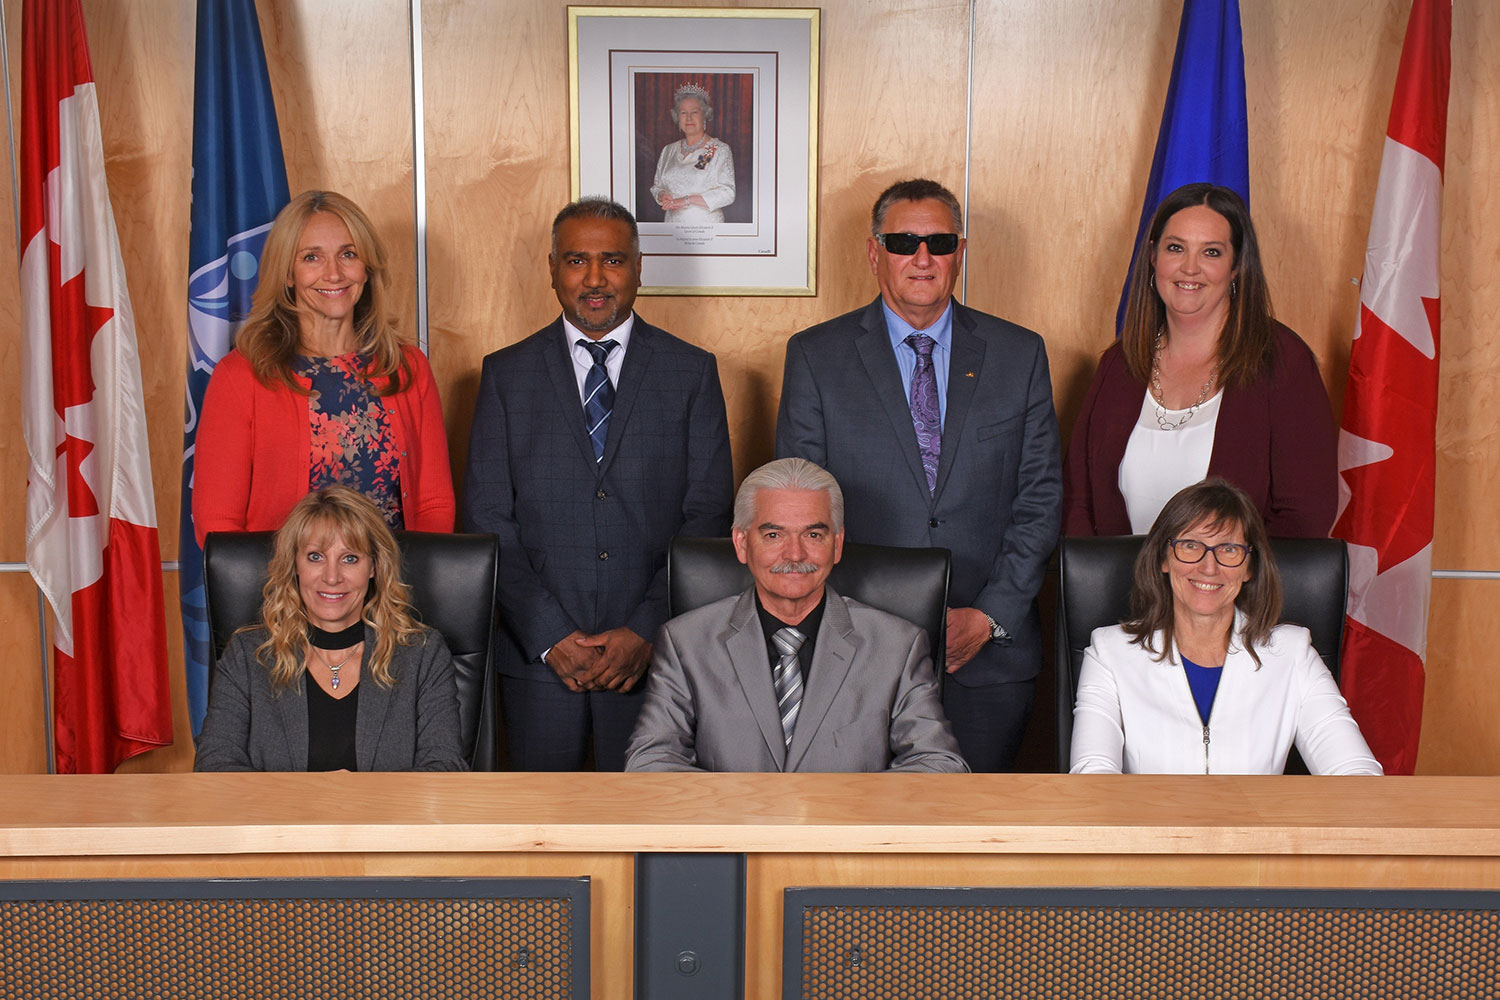 According to Chestermere Mayor Marshall Chalmers (front row, centre), the new city council’s first priority is to address Chestermere’s taxes and utility rates.
Courtesy City of Chestermere